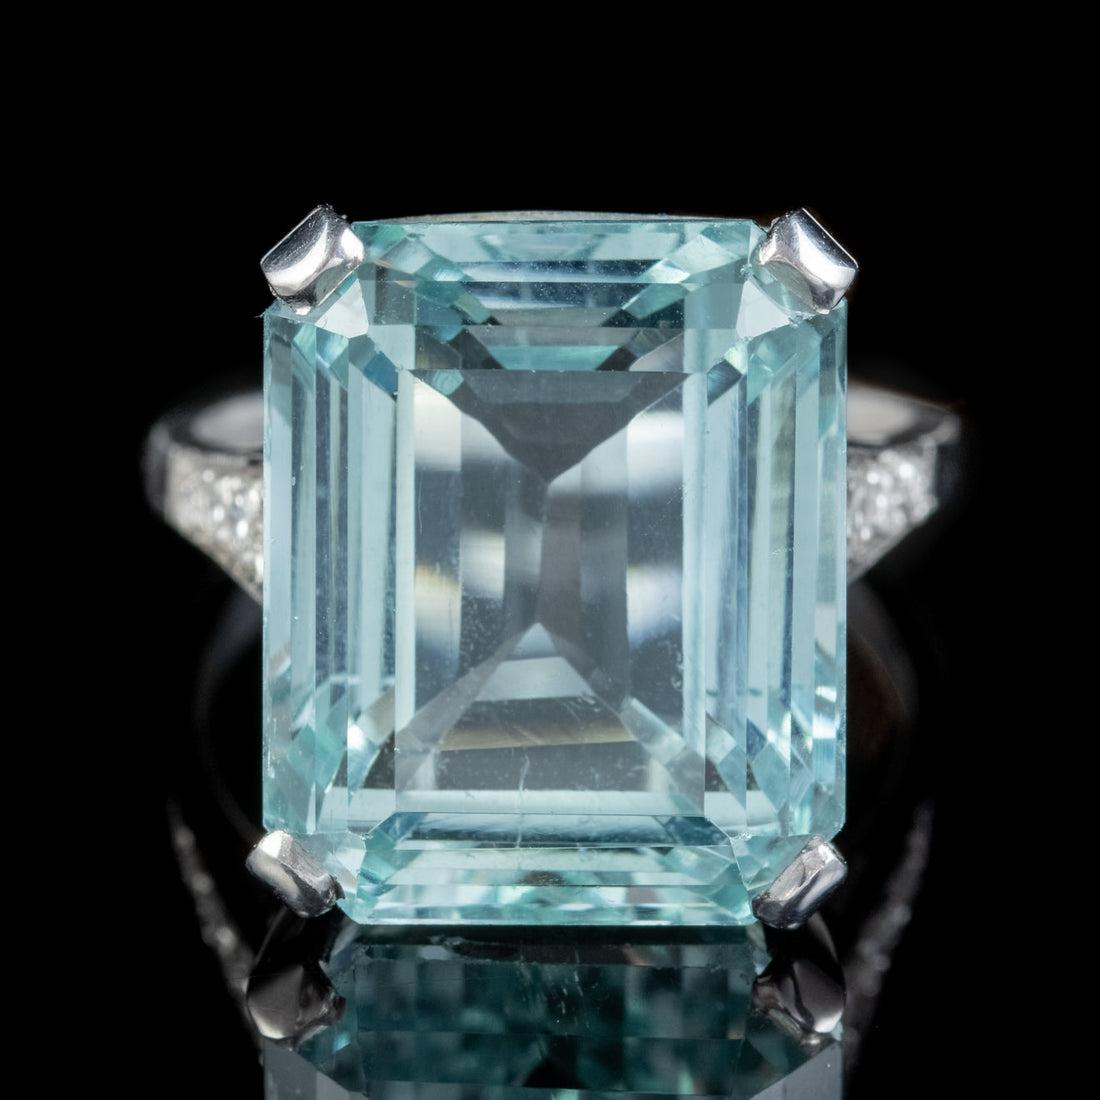 A magnificent Art Deco cocktail ring adorned with a beautiful emerald cut Aquamarine which weighs an impressive 18cts (approx.) and has a desirable clear ocean blue colour with flashes of green.

The shoulders are lined with bright Brilliant Cut